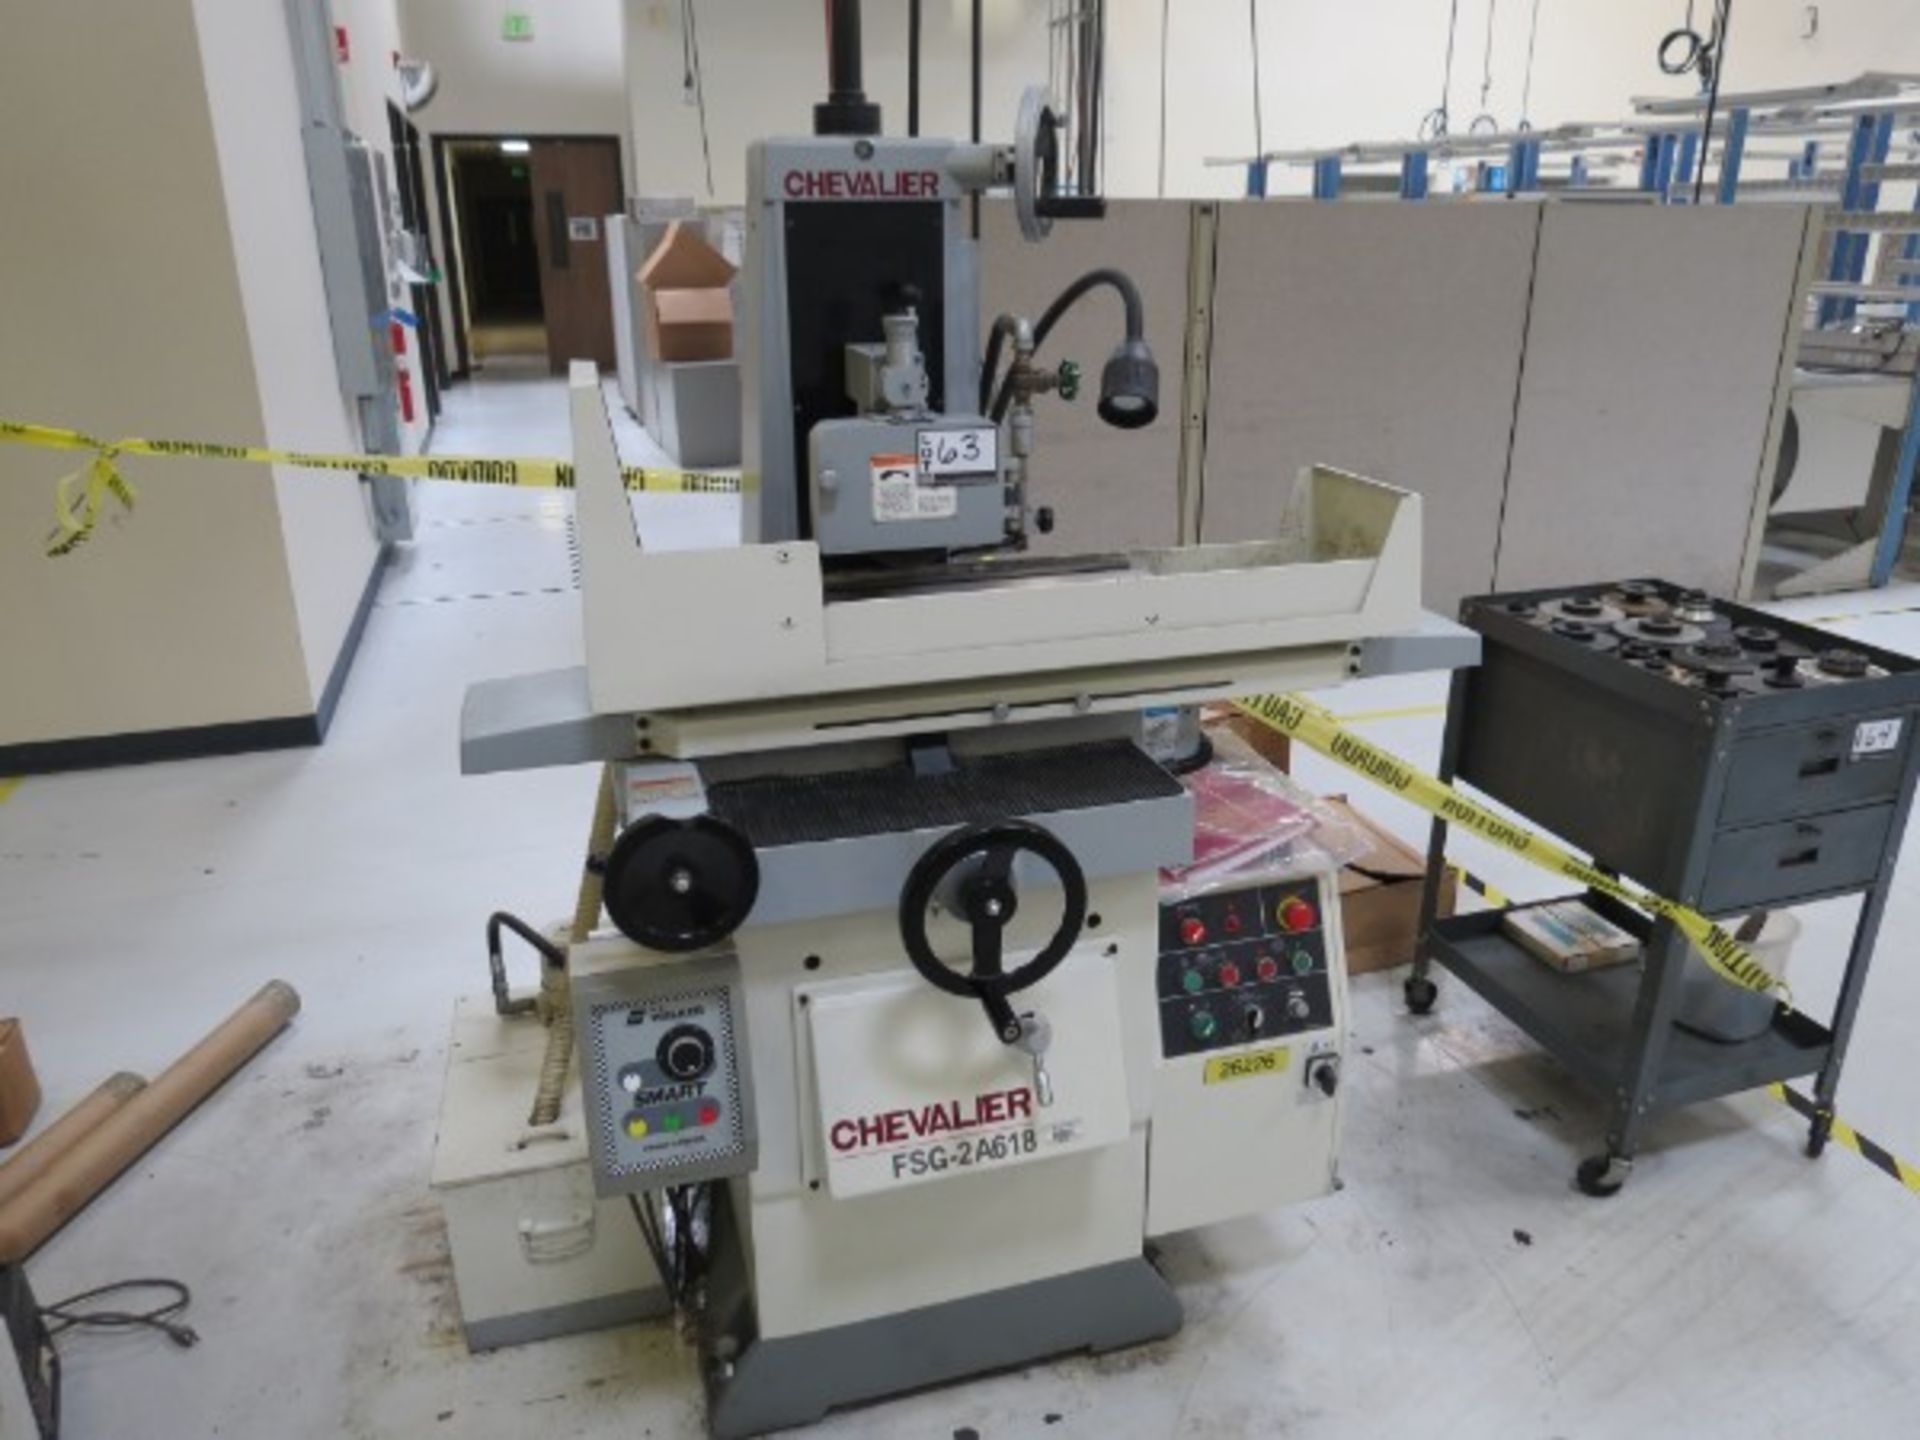 Chevalier FSG-2A618 2 Axis Hyd Surface grinder, 6”x18”, Electro-Magnetic chuck, S/N R7961001 - Image 5 of 6